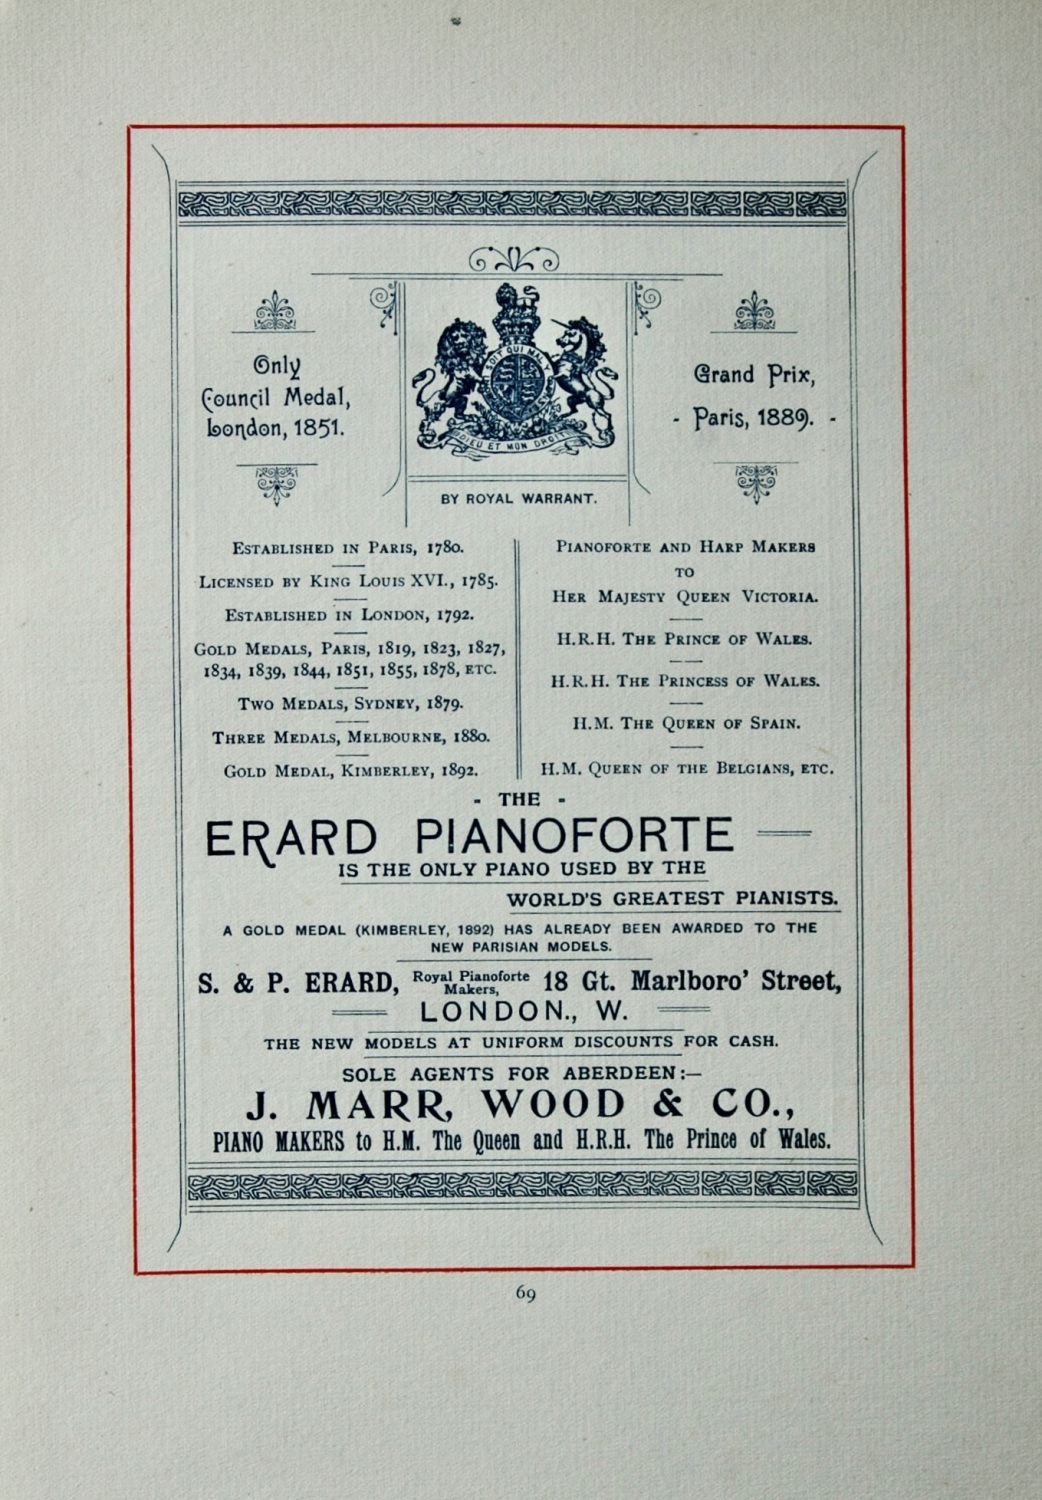 Marr, J., Wood & Co., Piano Makers to H.M. The Queen and H.R.H. The Prince 